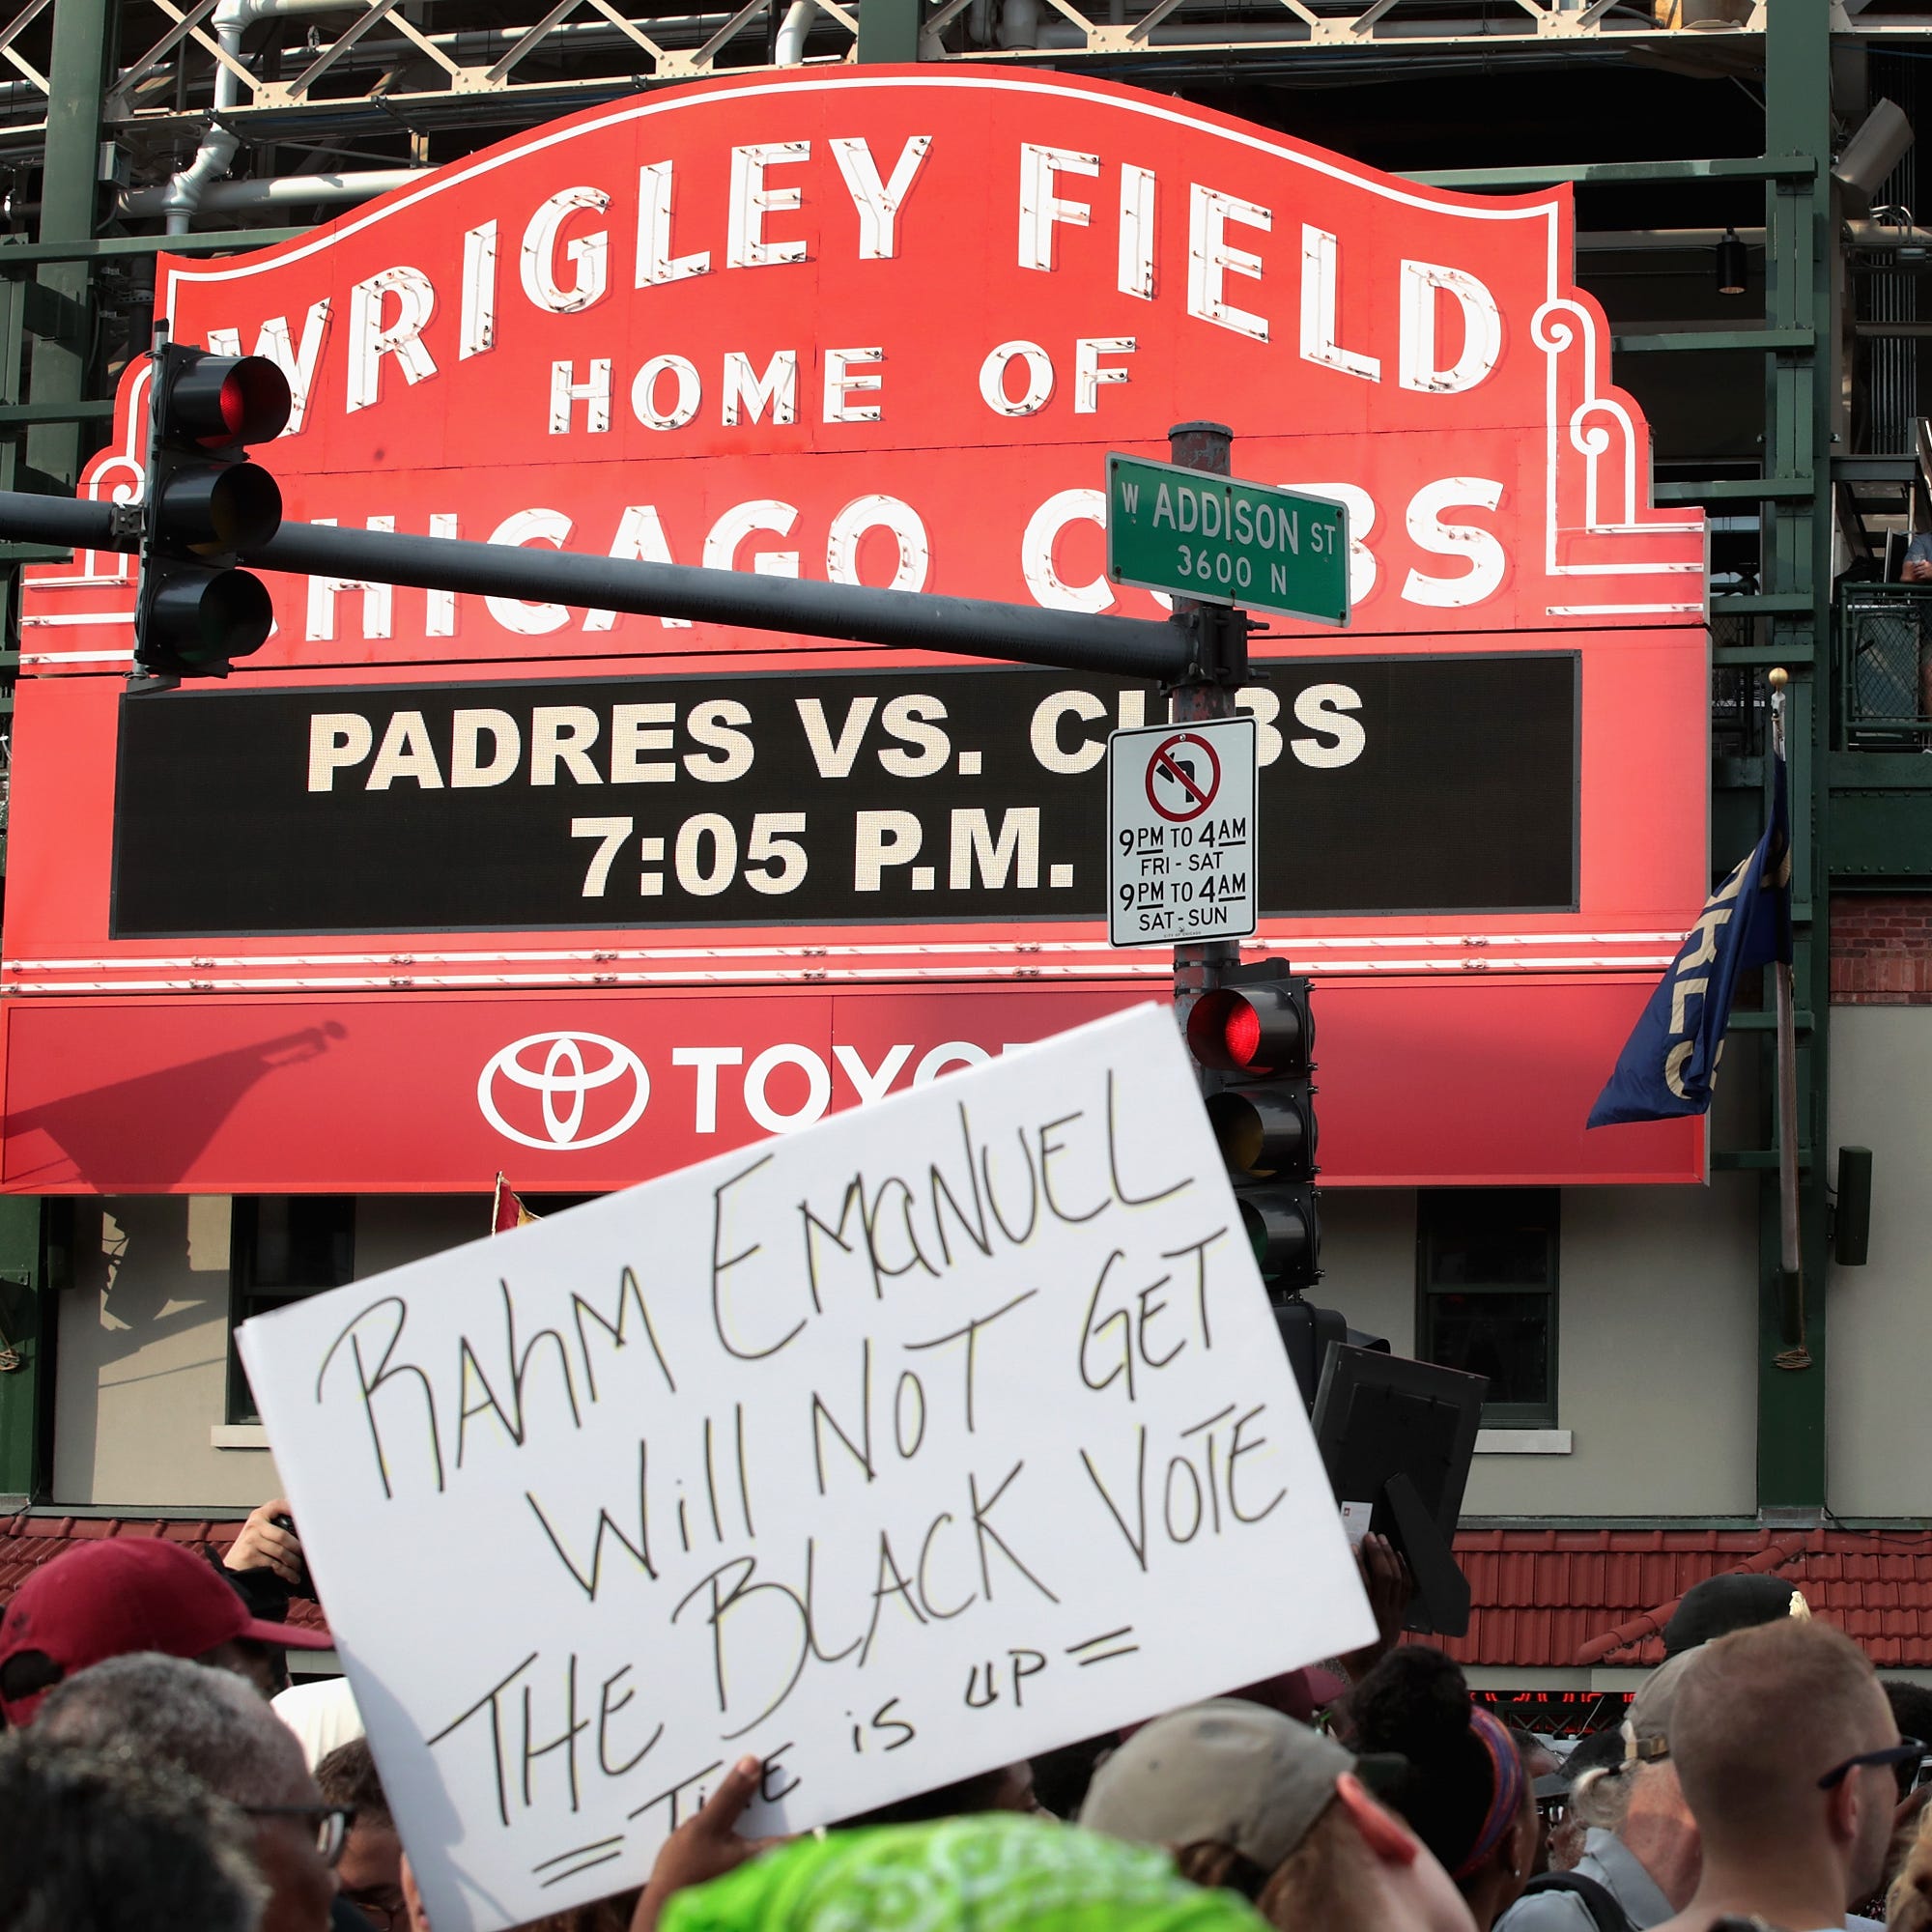 Demonstrators protest in front of Wrigley Field before  the start of the matchup between the Cubs and the Padres on August 2, 2018 in Chicago, Illinois. The demonstrators, who marched from Lake Shore Drive and through the nearby neighborhoods were pr